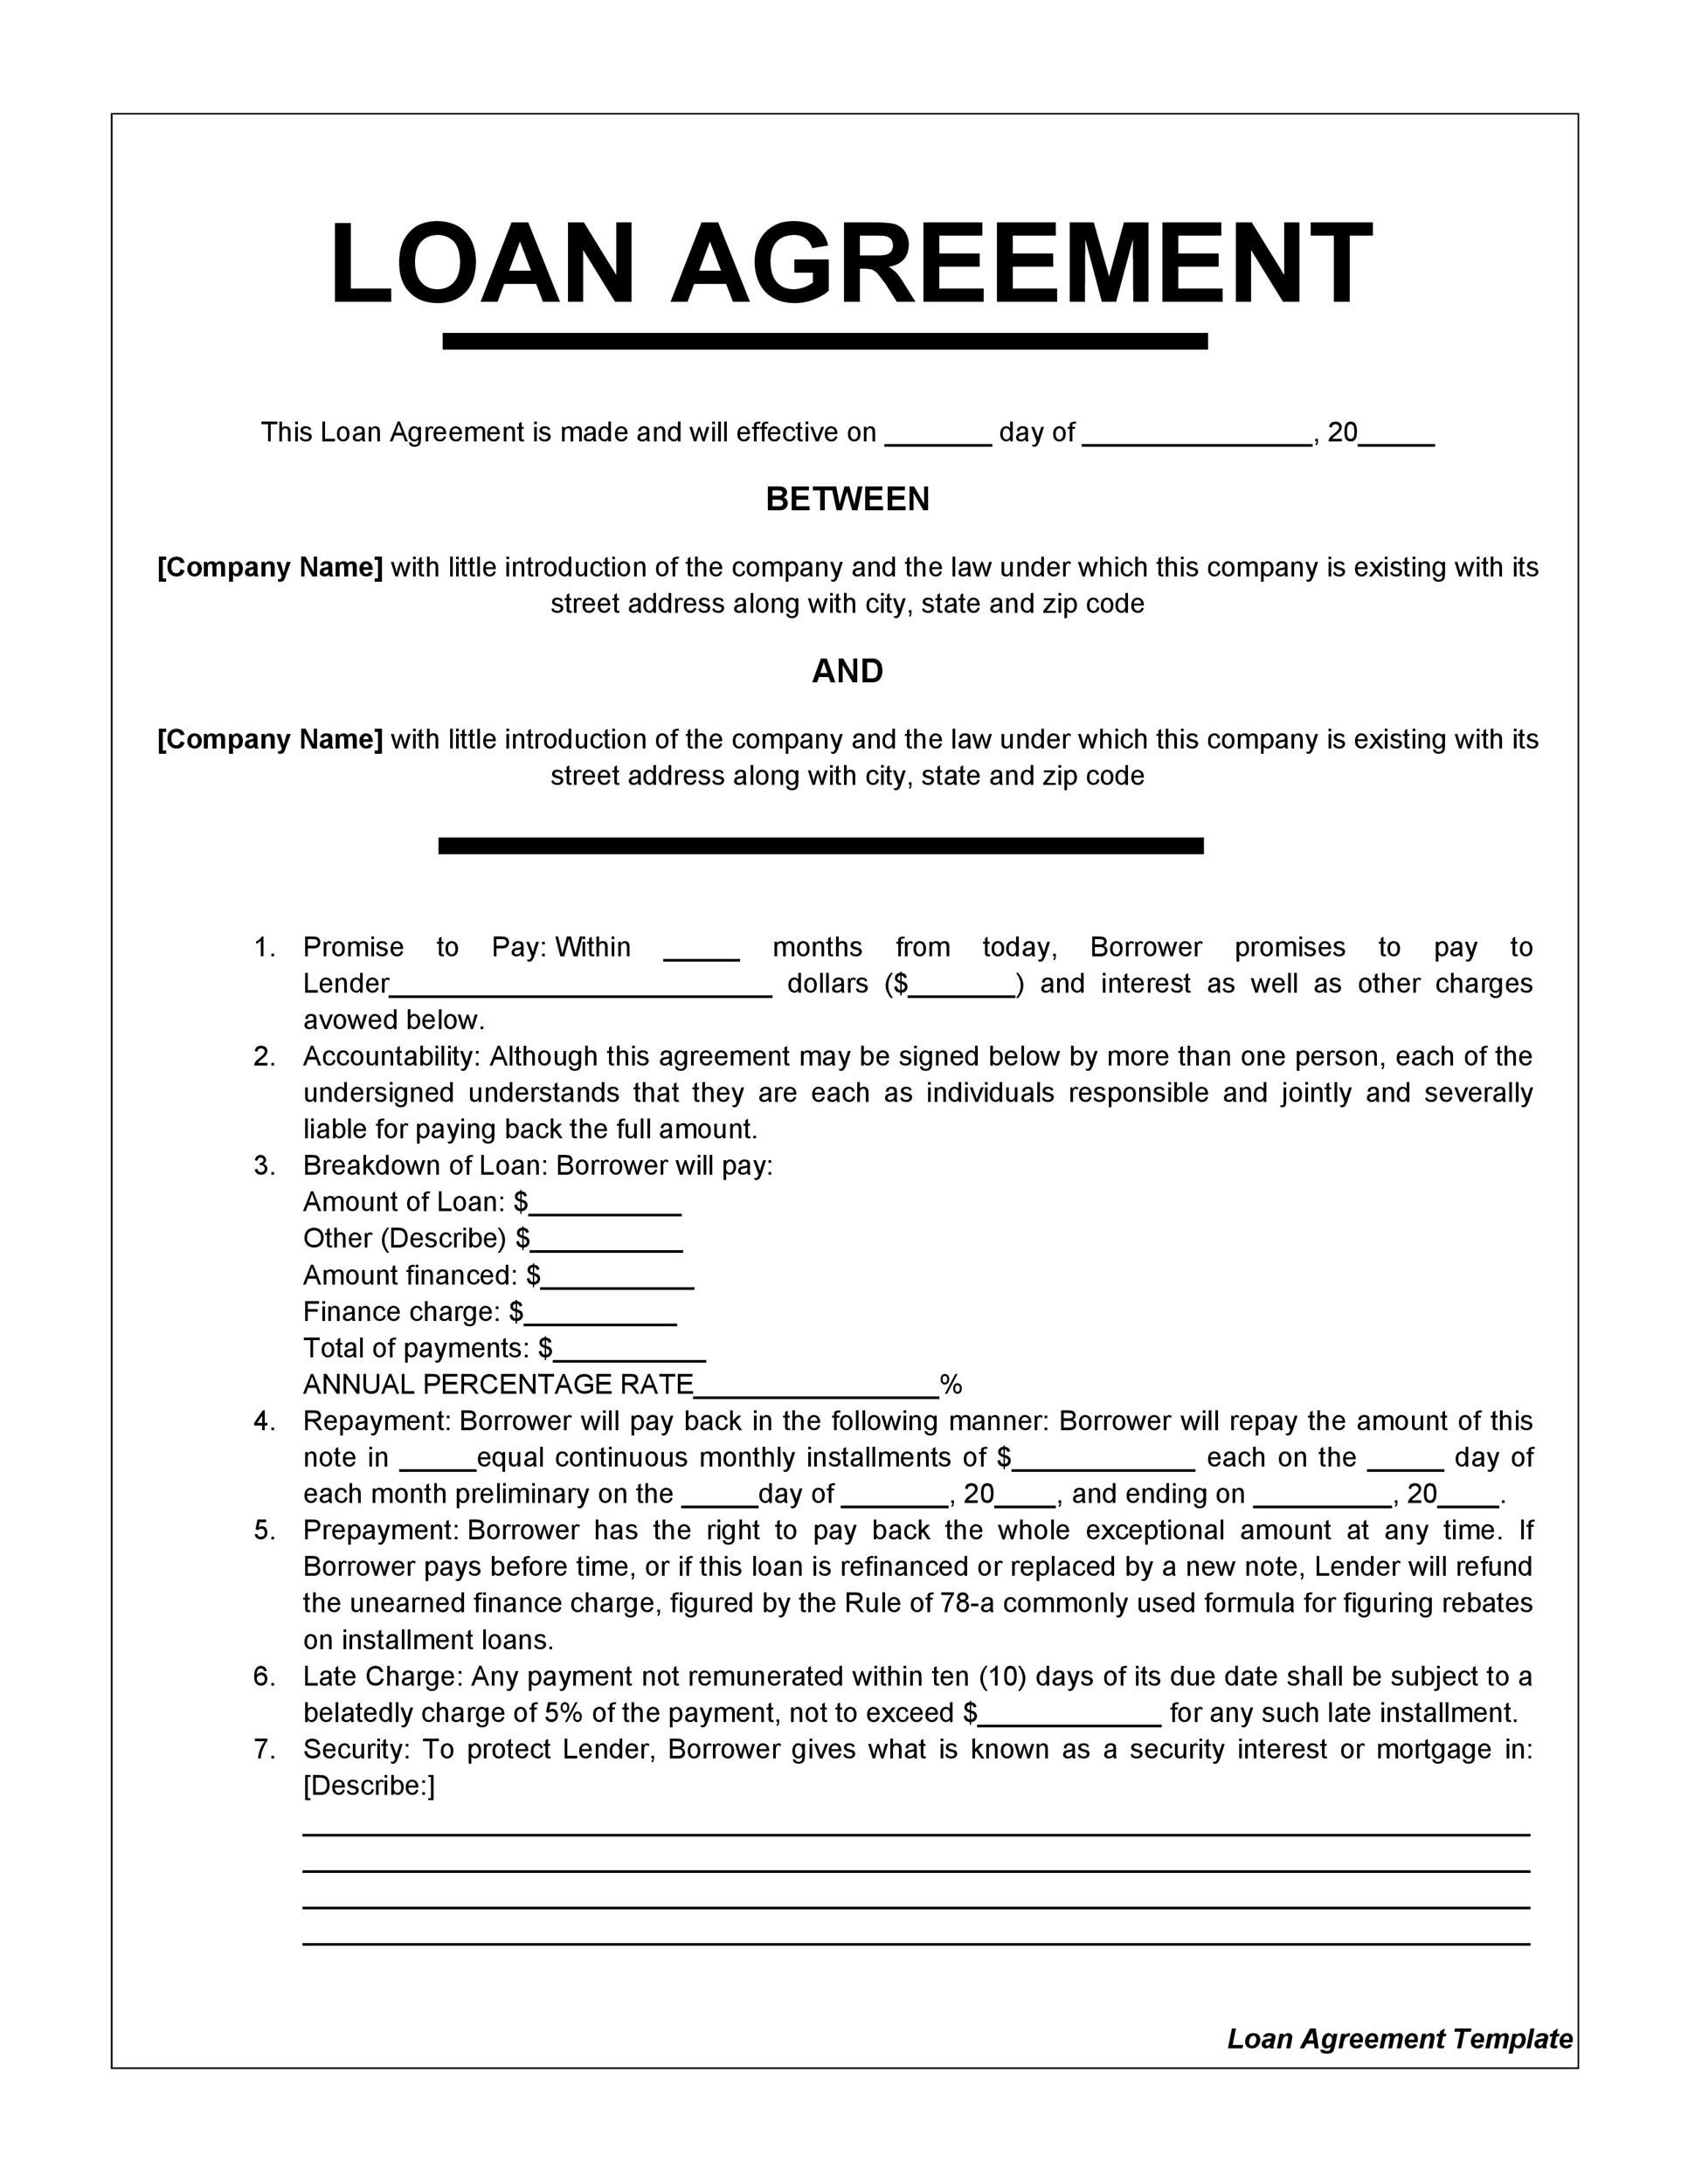 Private Loan Agreement Template Free | Great Professional Template Ideas